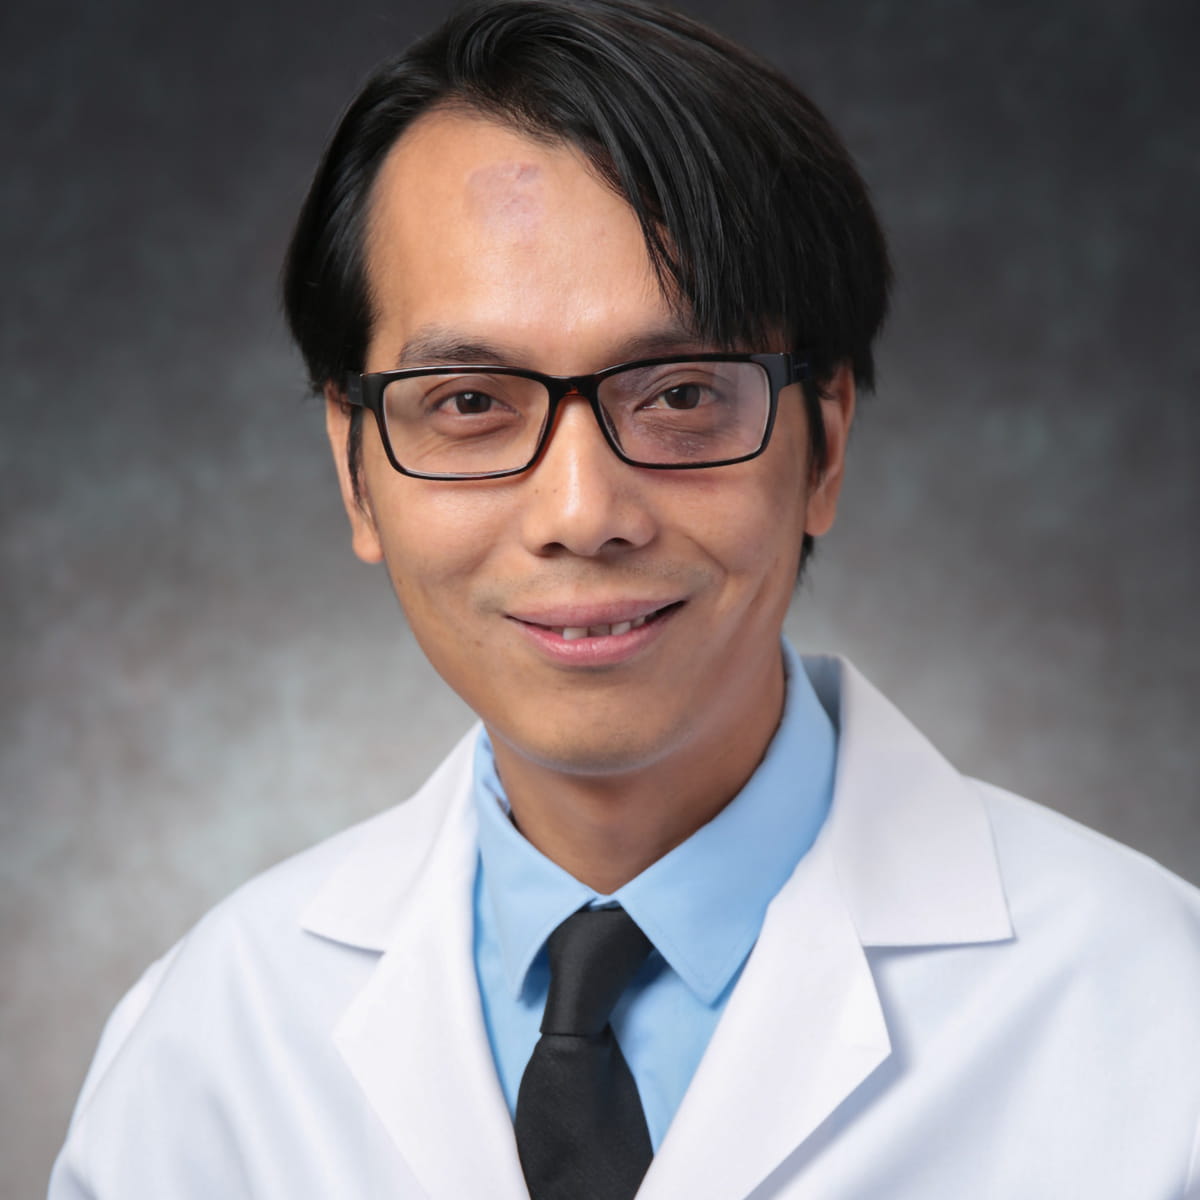 A friendly headshot of Quoc Ngo, MD